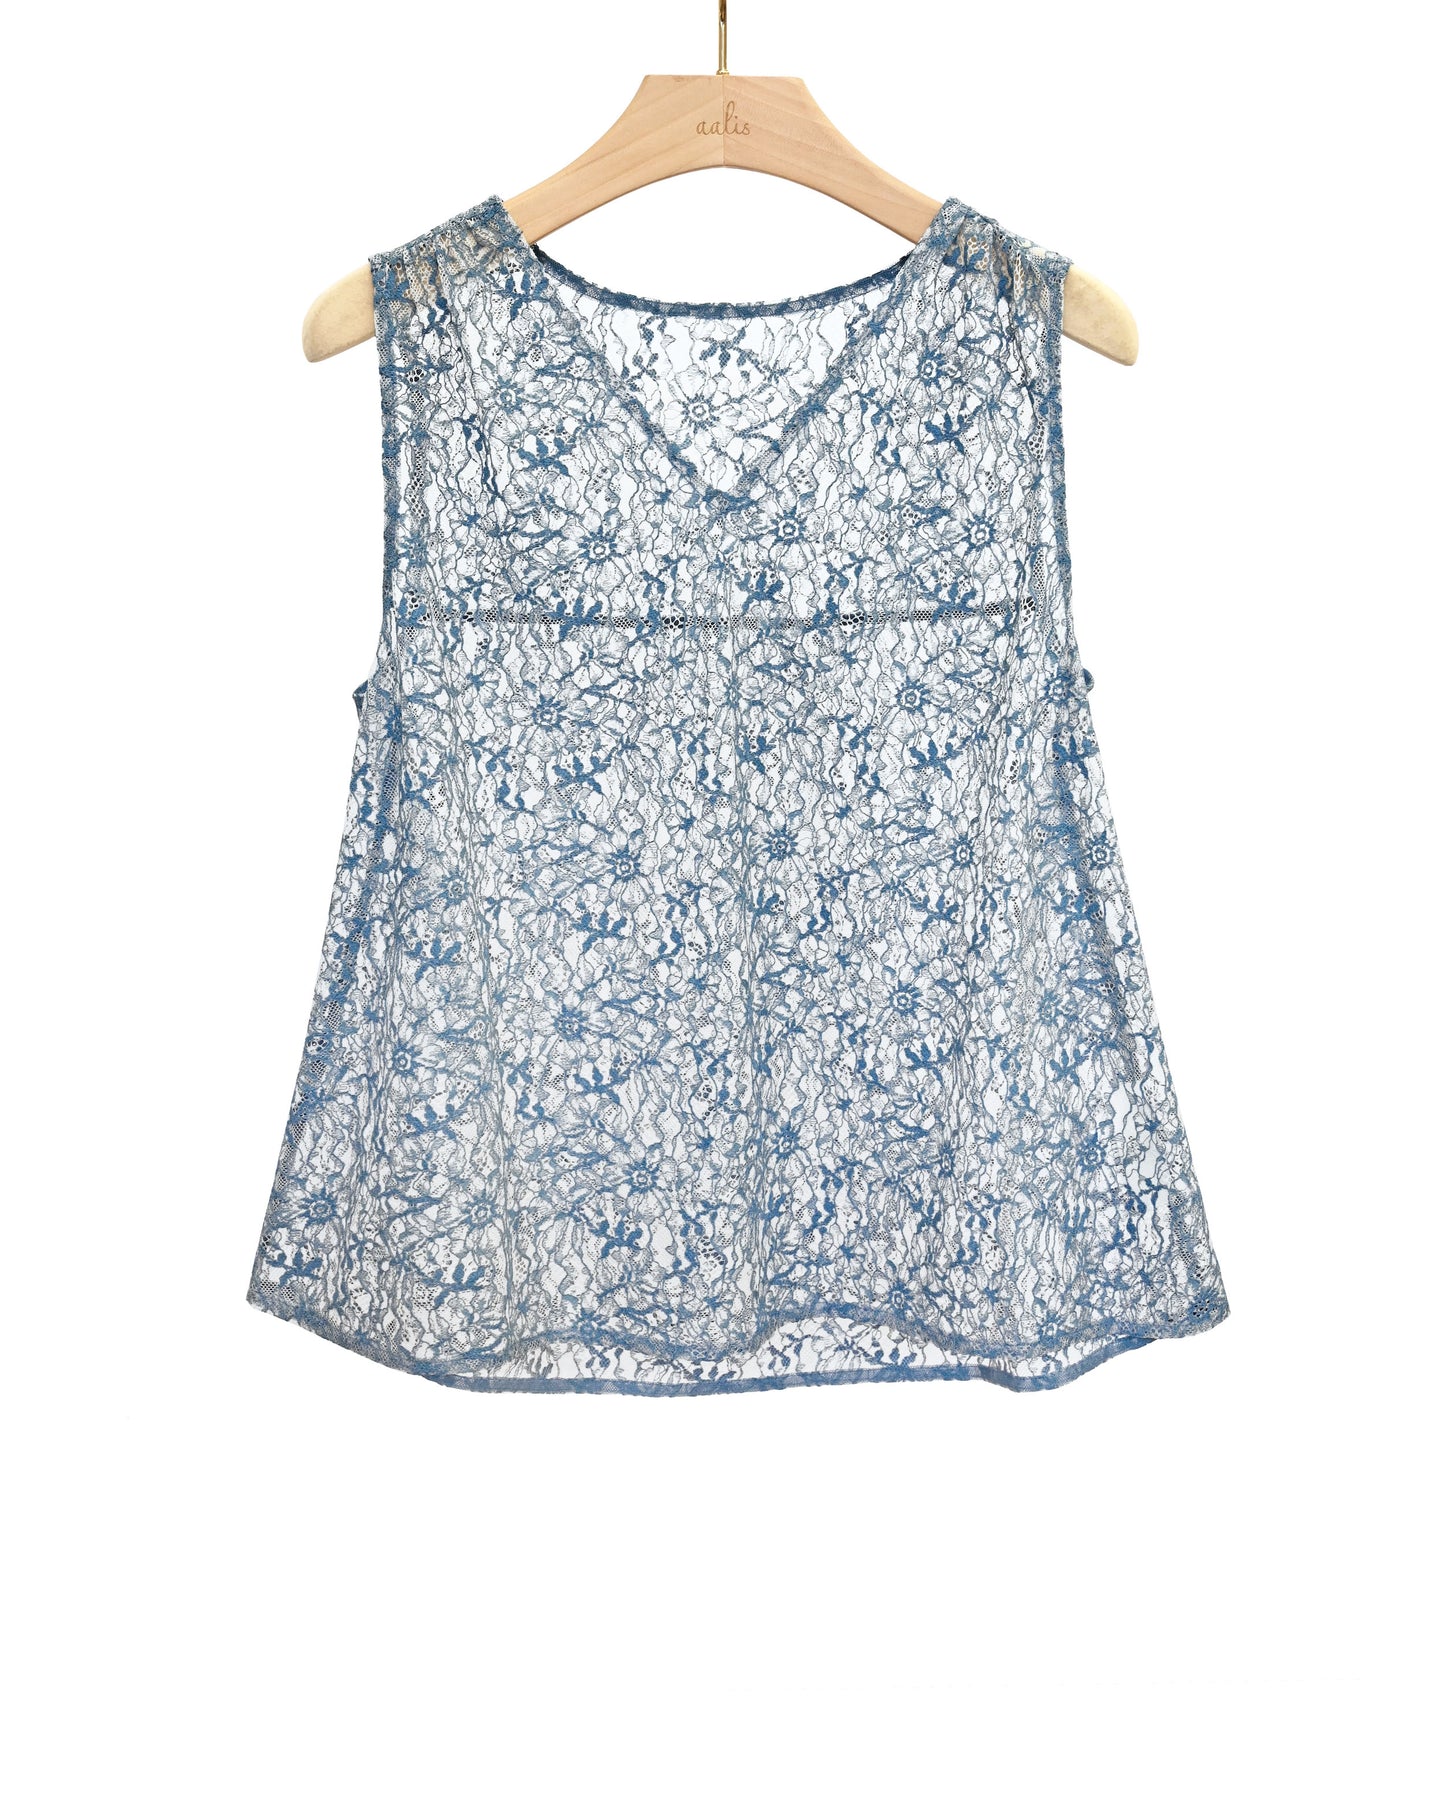 Load image into Gallery viewer, aalis JOLIE ruching shoulder top (Dusty blue lace)
